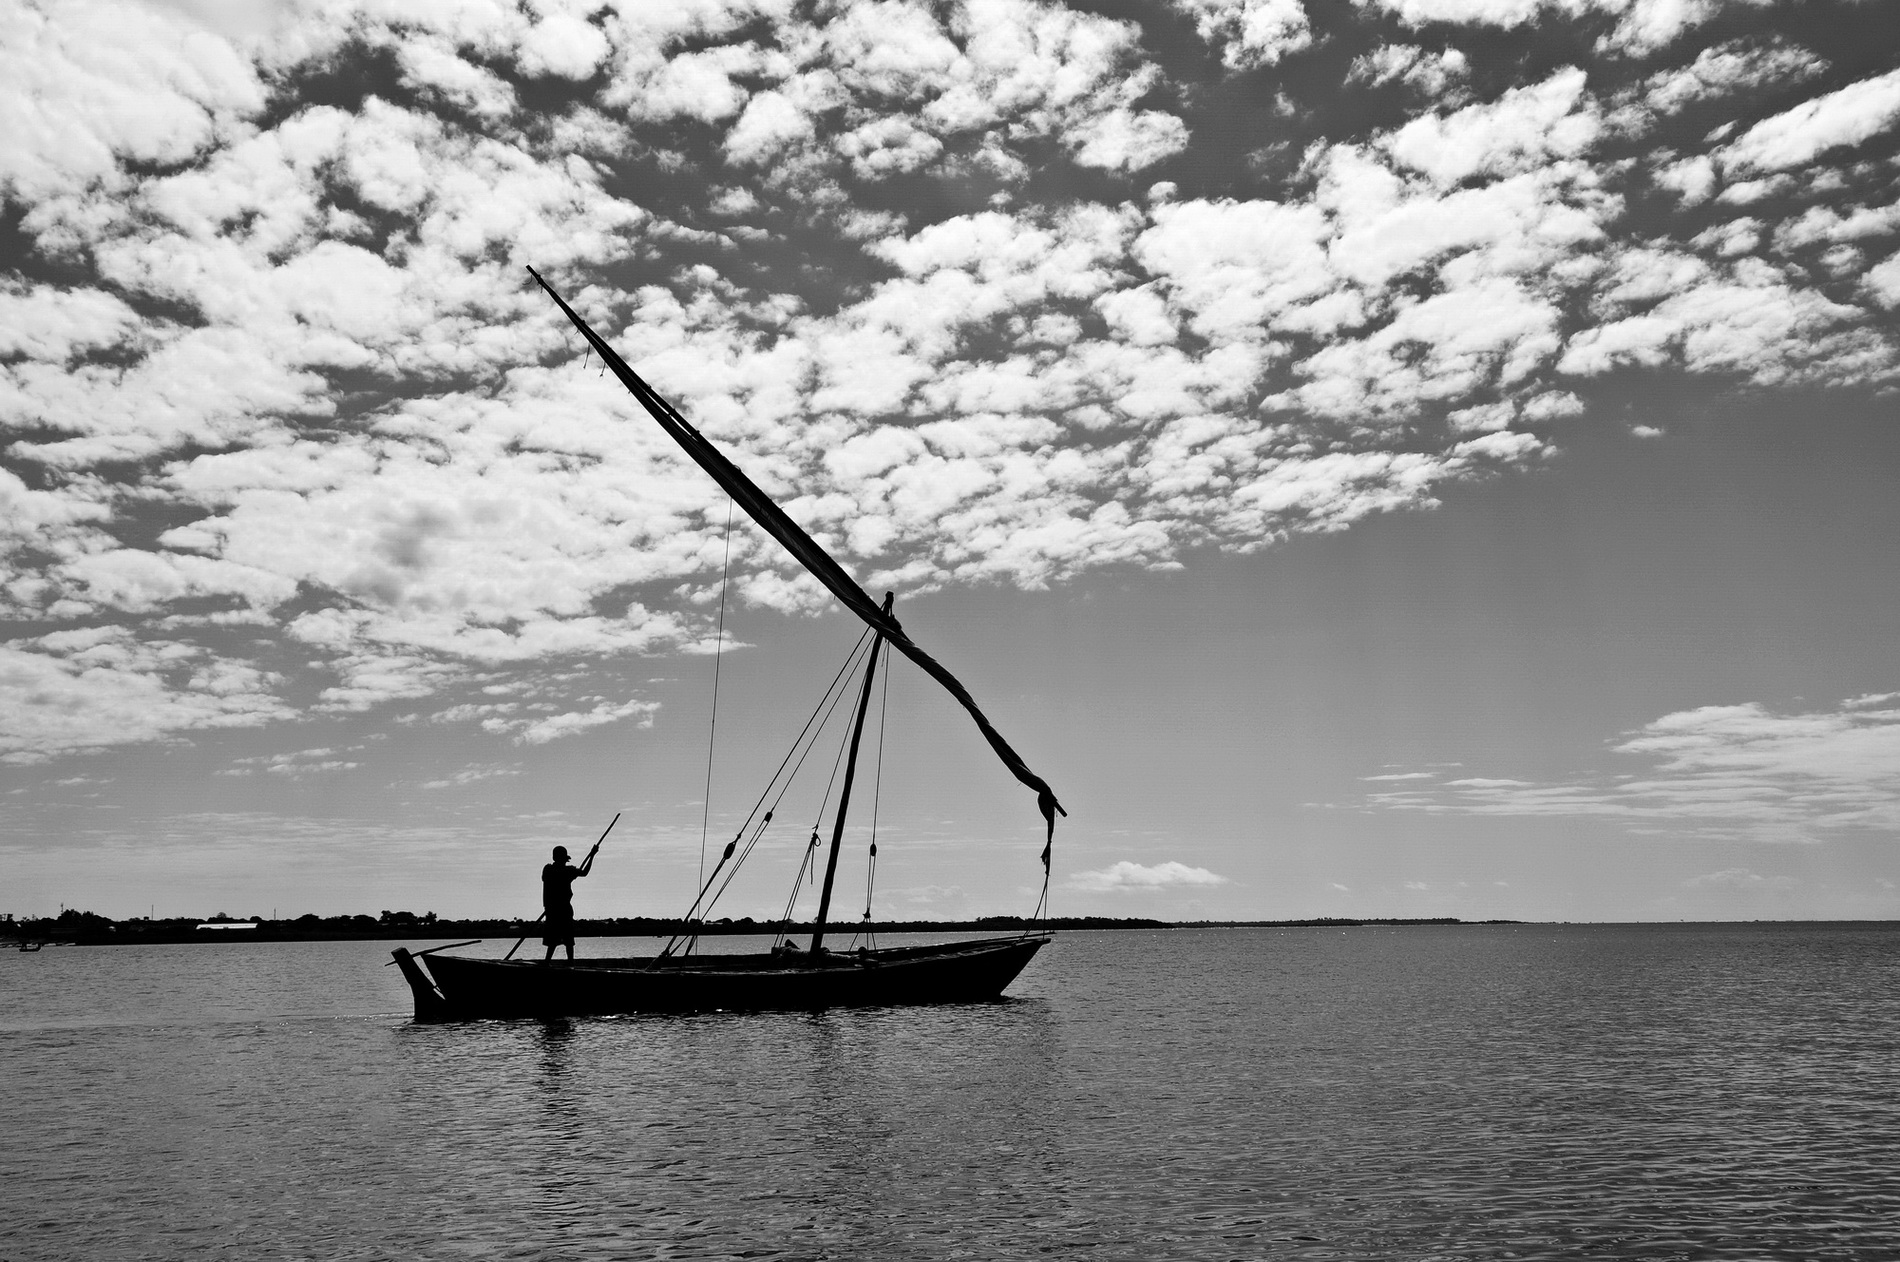 Mozambique (traditional fishing boat)...